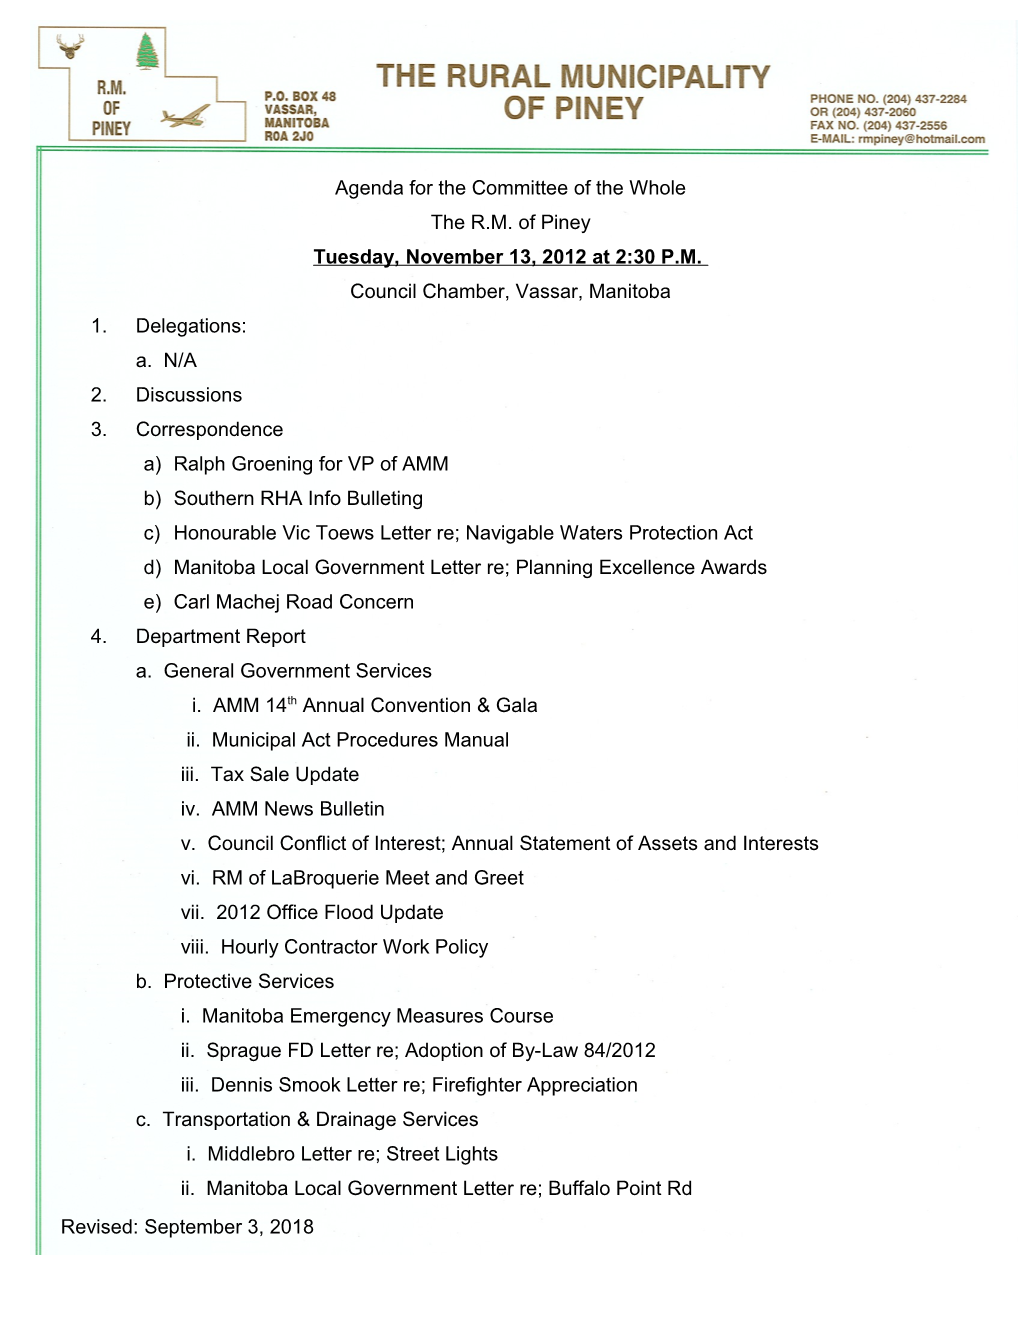 Agenda for the Organizational Meeting of the Council of the R